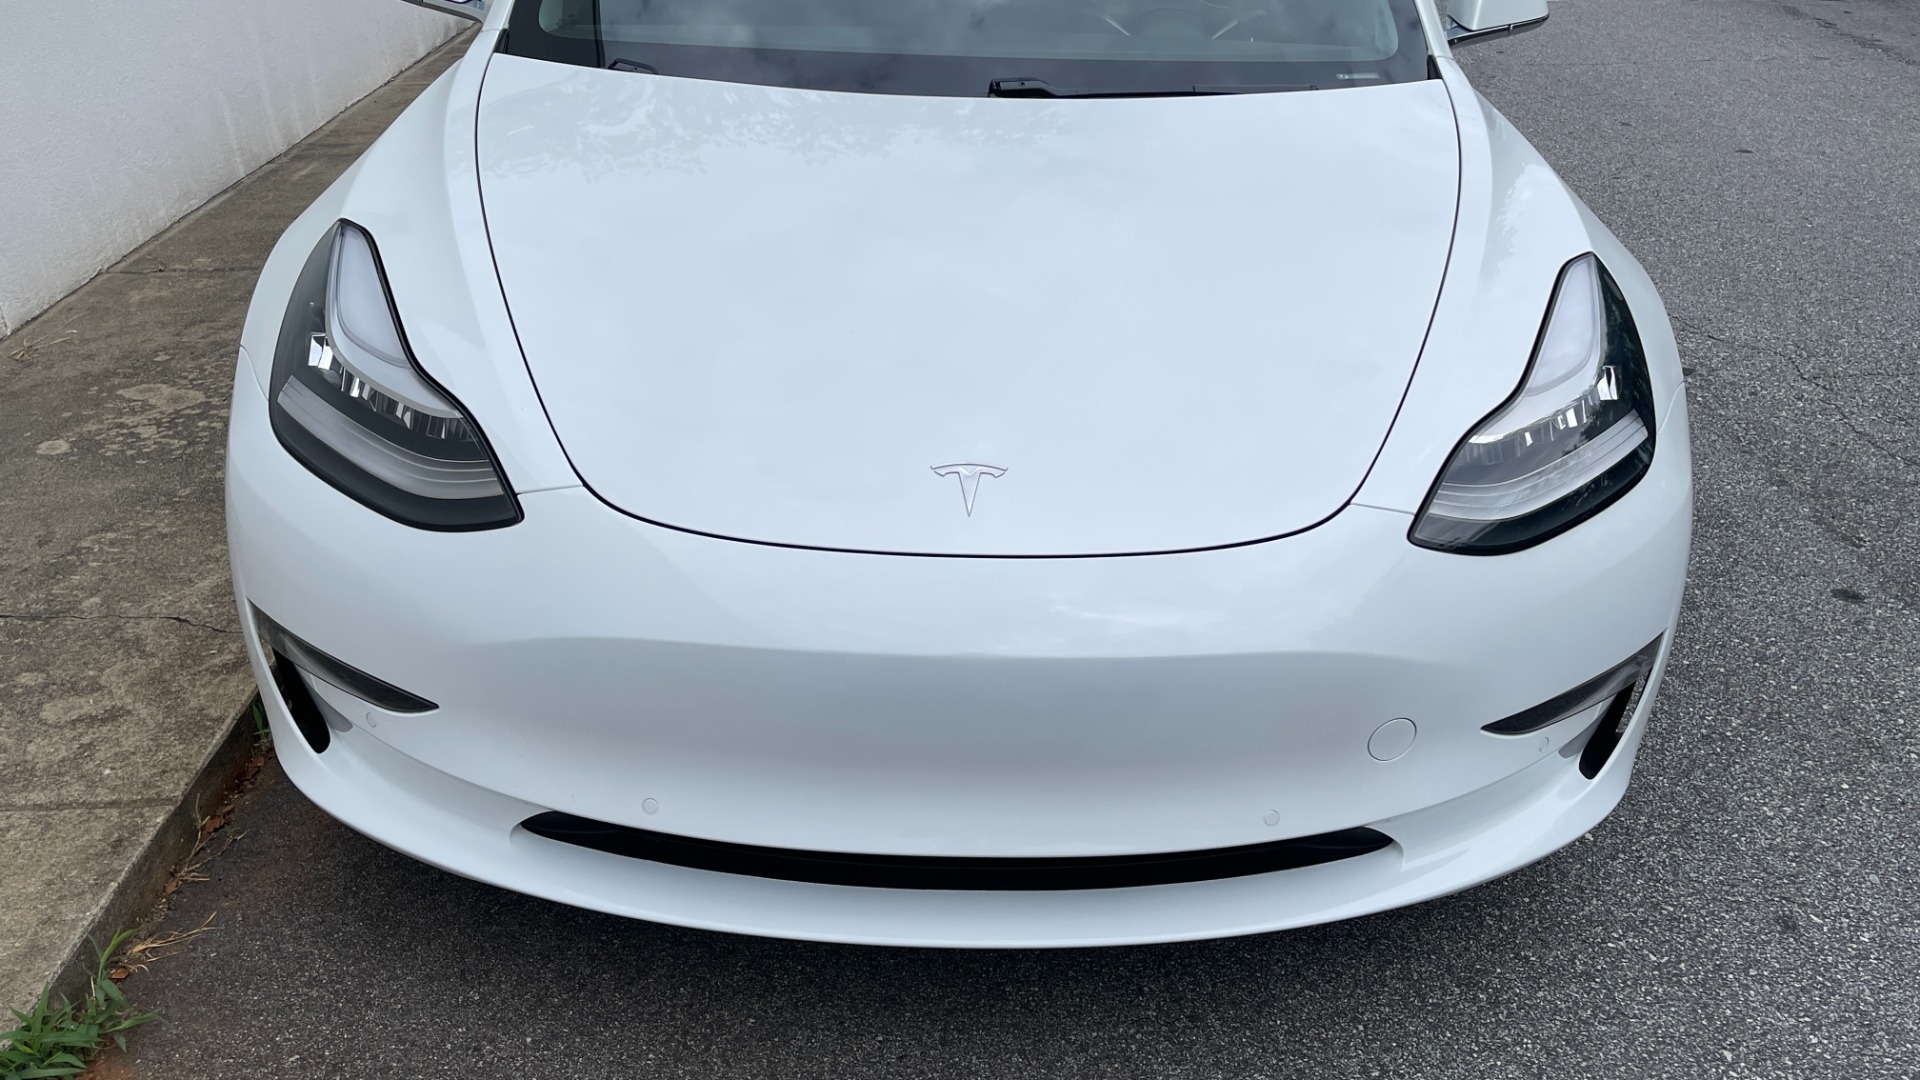 Used 2020 Tesla Model 3 STANDARD RANGE PLUS / AUTOPILOT / STANDARD CONNECTIVITY / PEARL WHITE for sale $46,995 at Formula Imports in Charlotte NC 28227 4